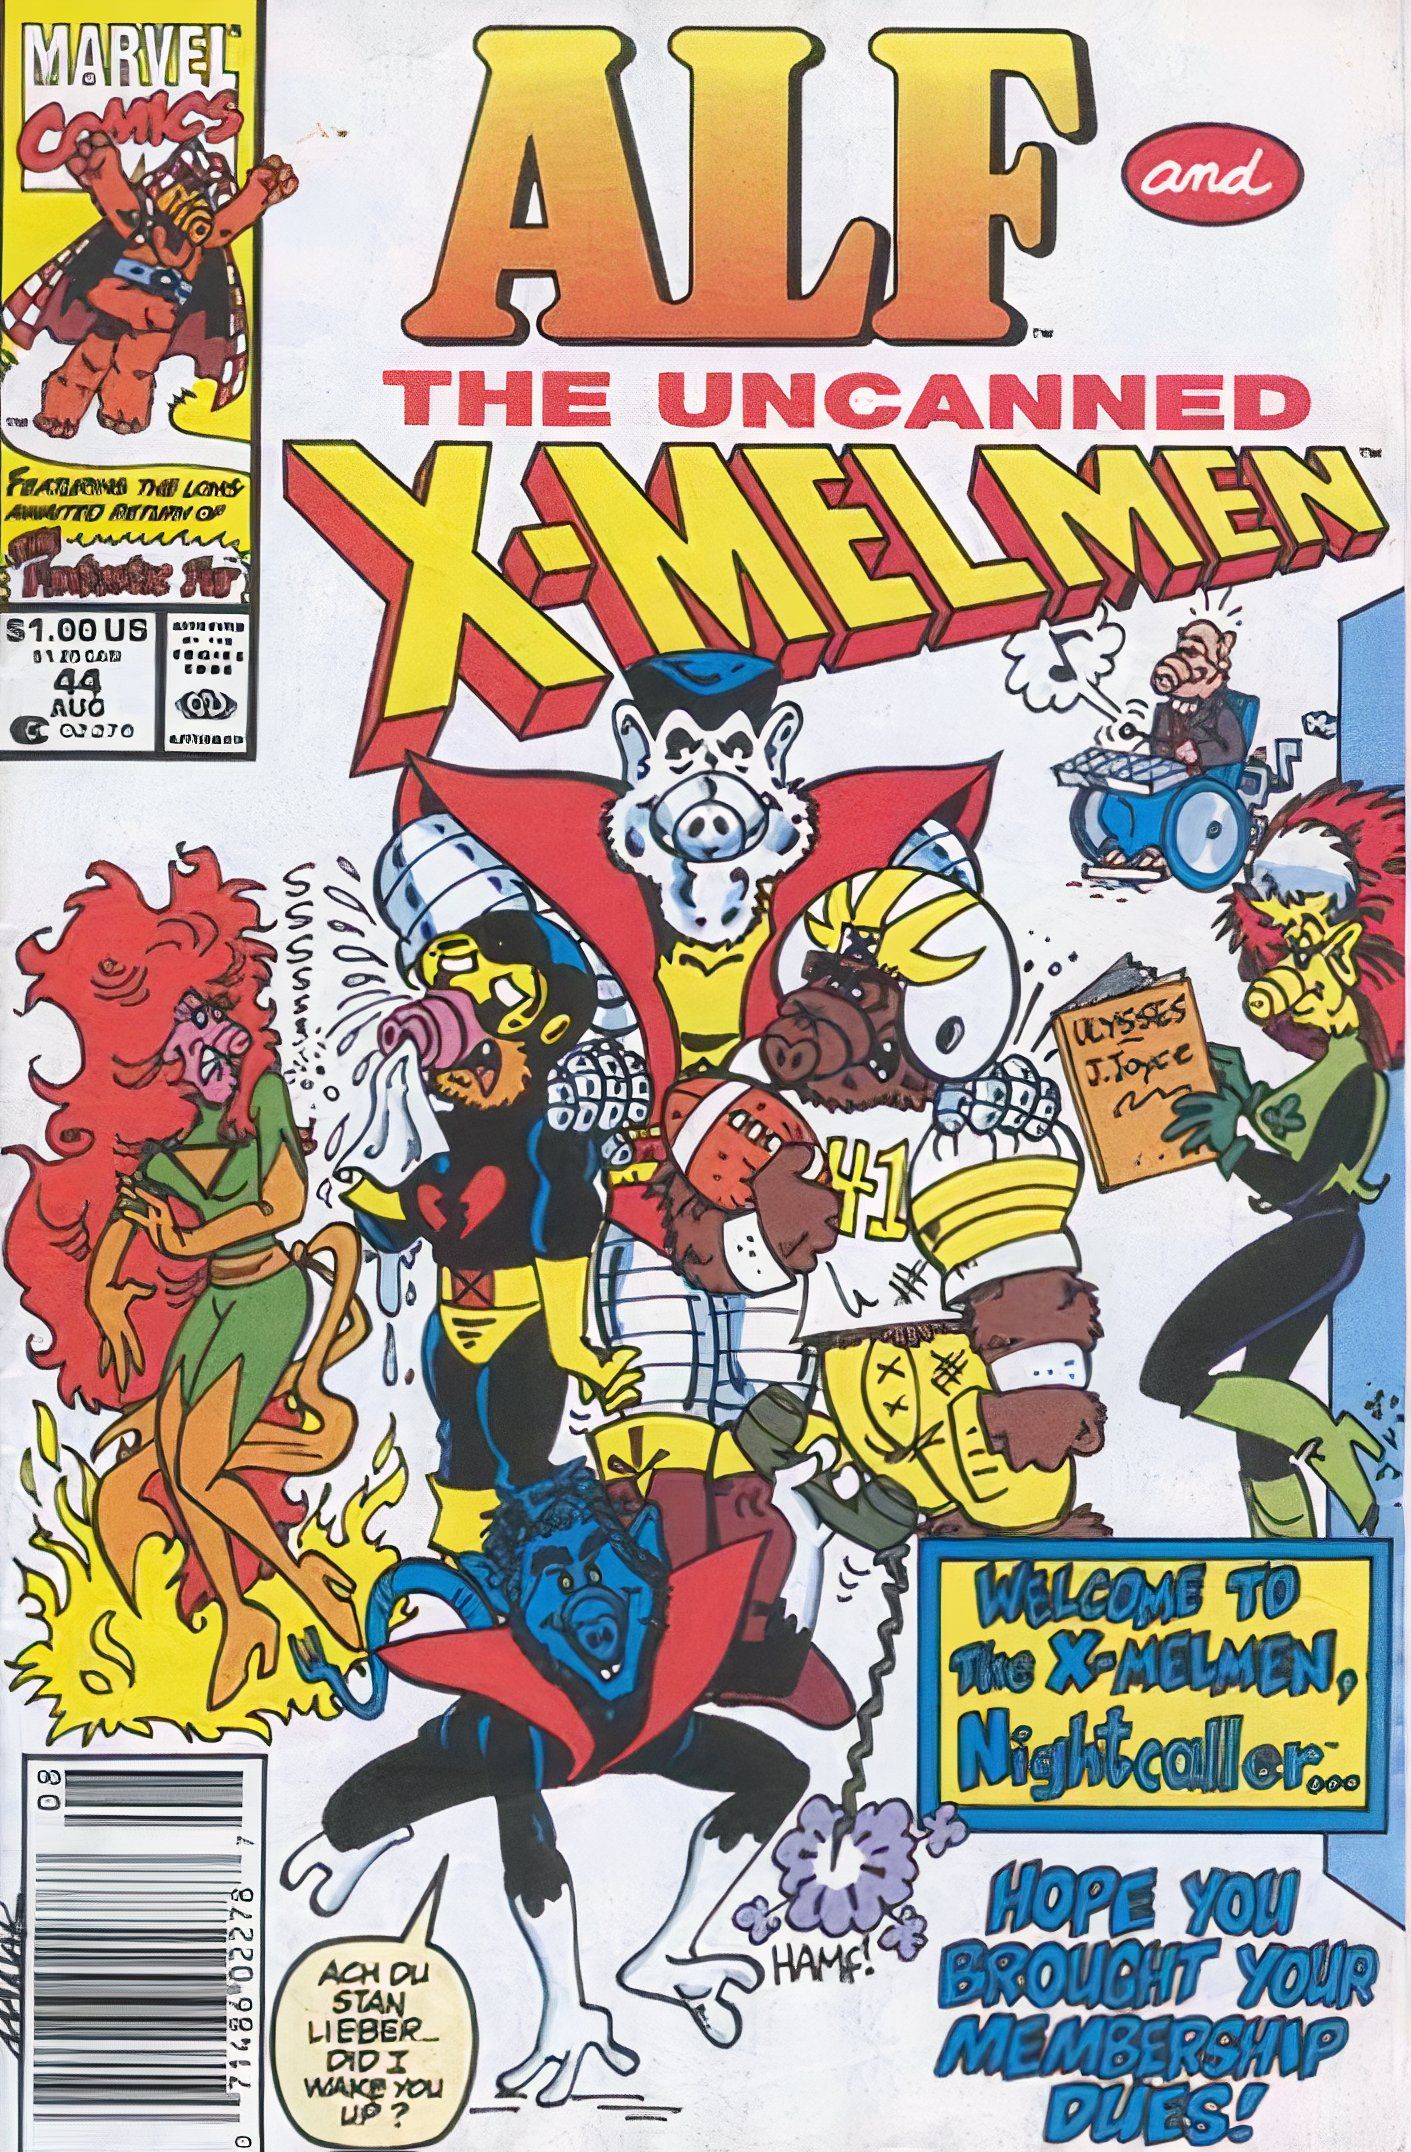 Cover for Alf #44 featuring the return of the Uncanned X-Men